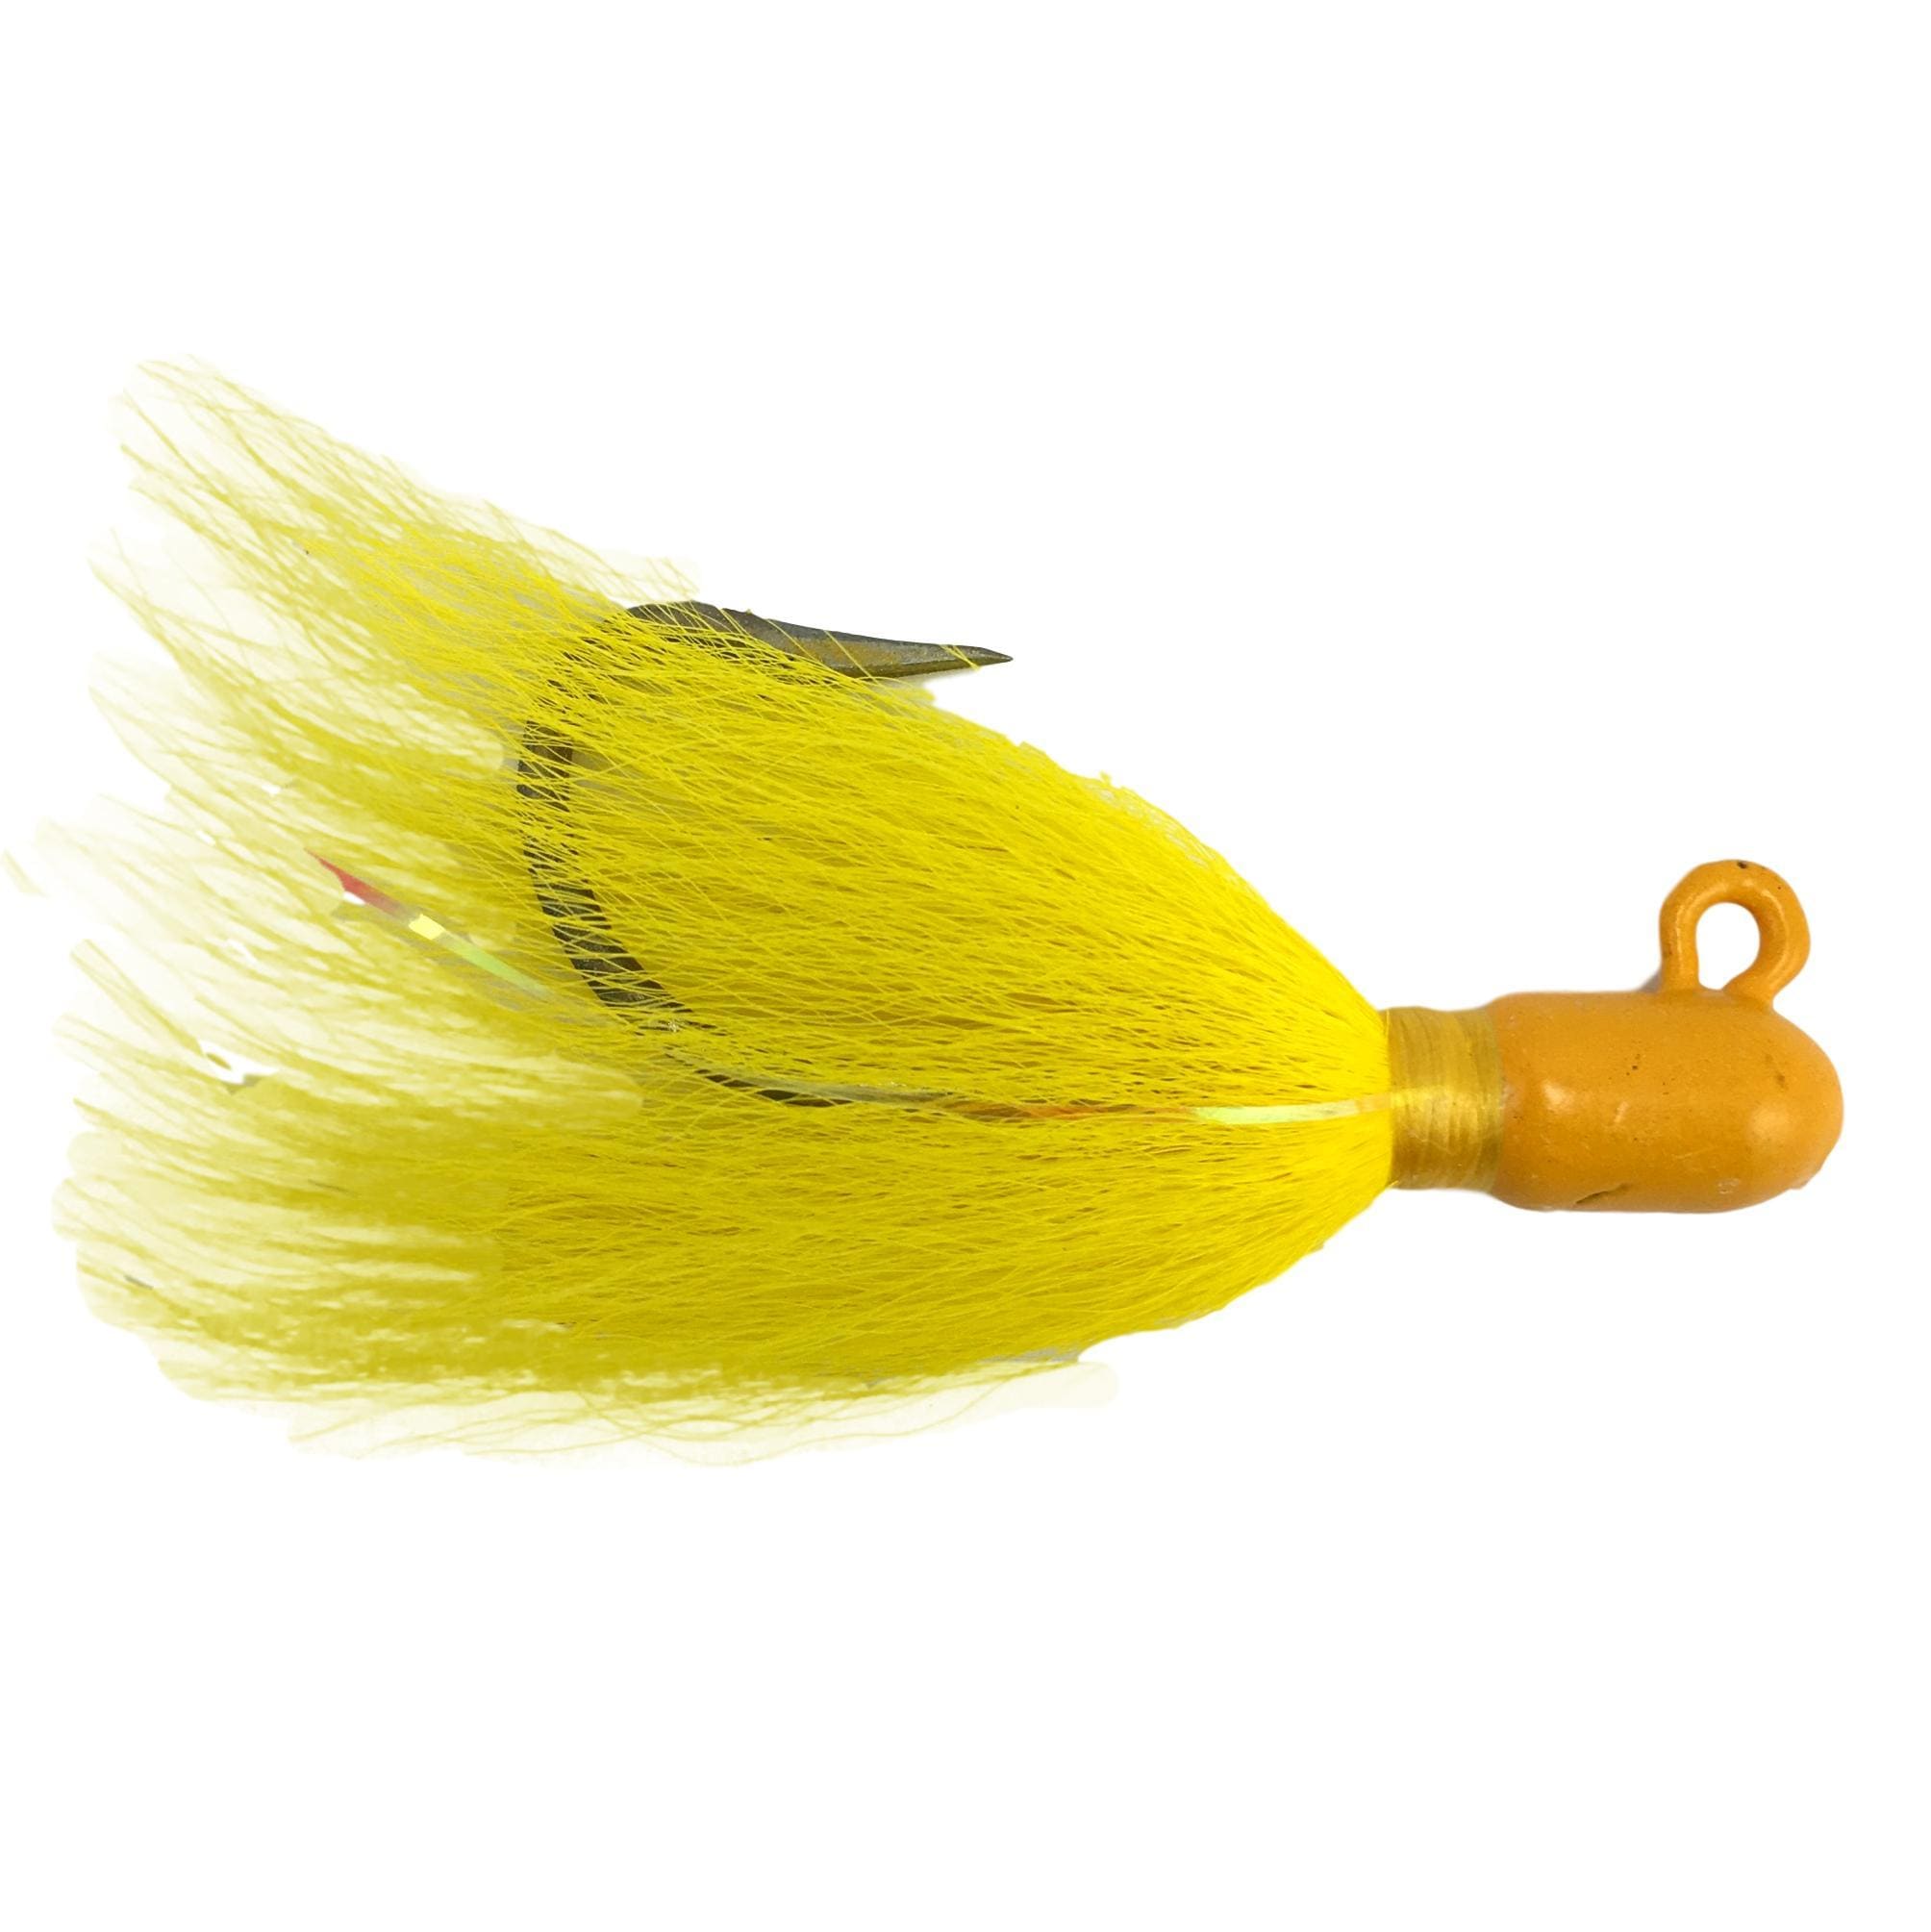 MagicTail Bullet Head Bucktails - The Saltwater Edge